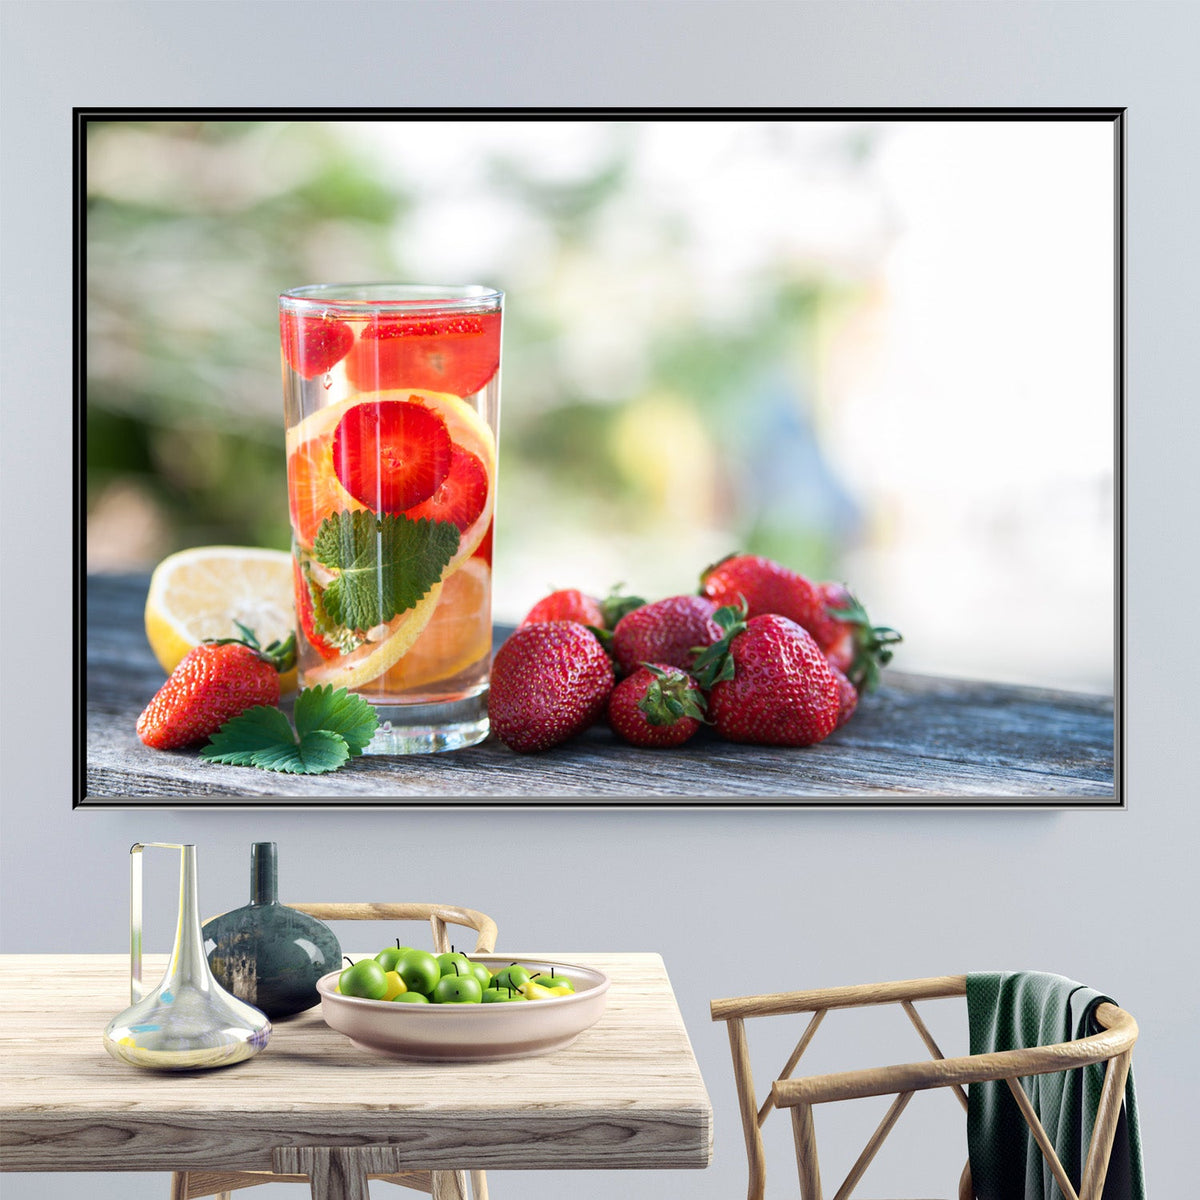 https://cdn.shopify.com/s/files/1/0387/9986/8044/products/StrawberryCleanseCanvasArtprintFloatingFrame-1.jpg